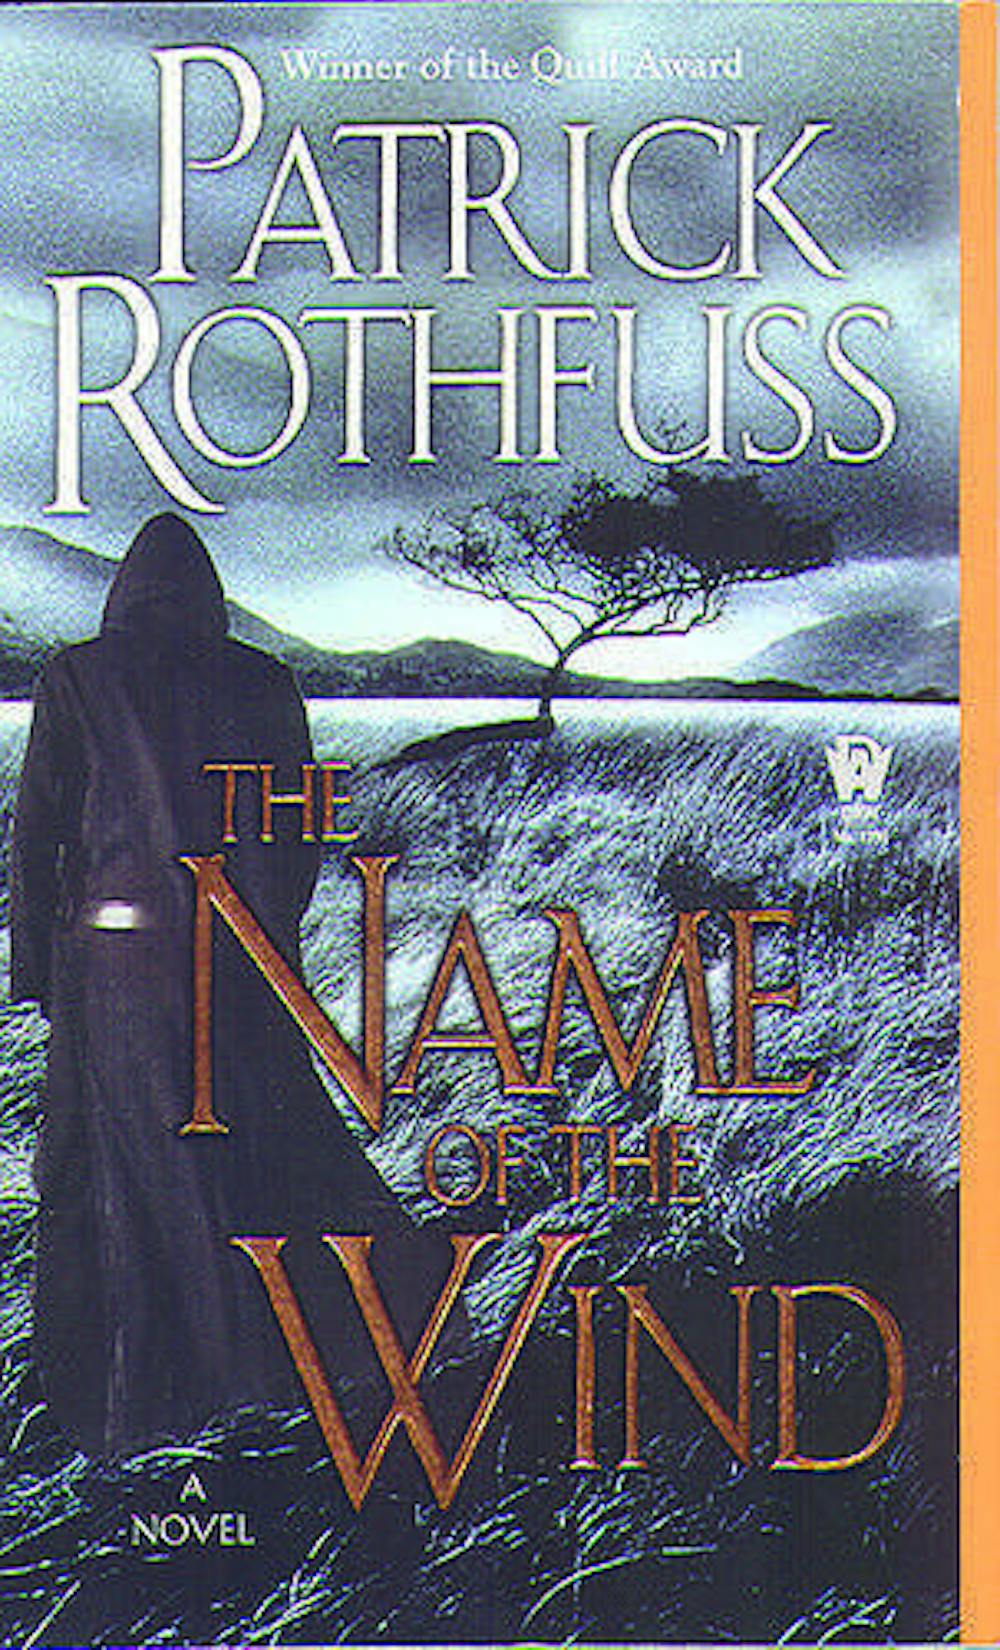 Patrick Rothfuss's The Name of the Wind defies fantasy tropes with an intense plot that will leave readers begging for more. 